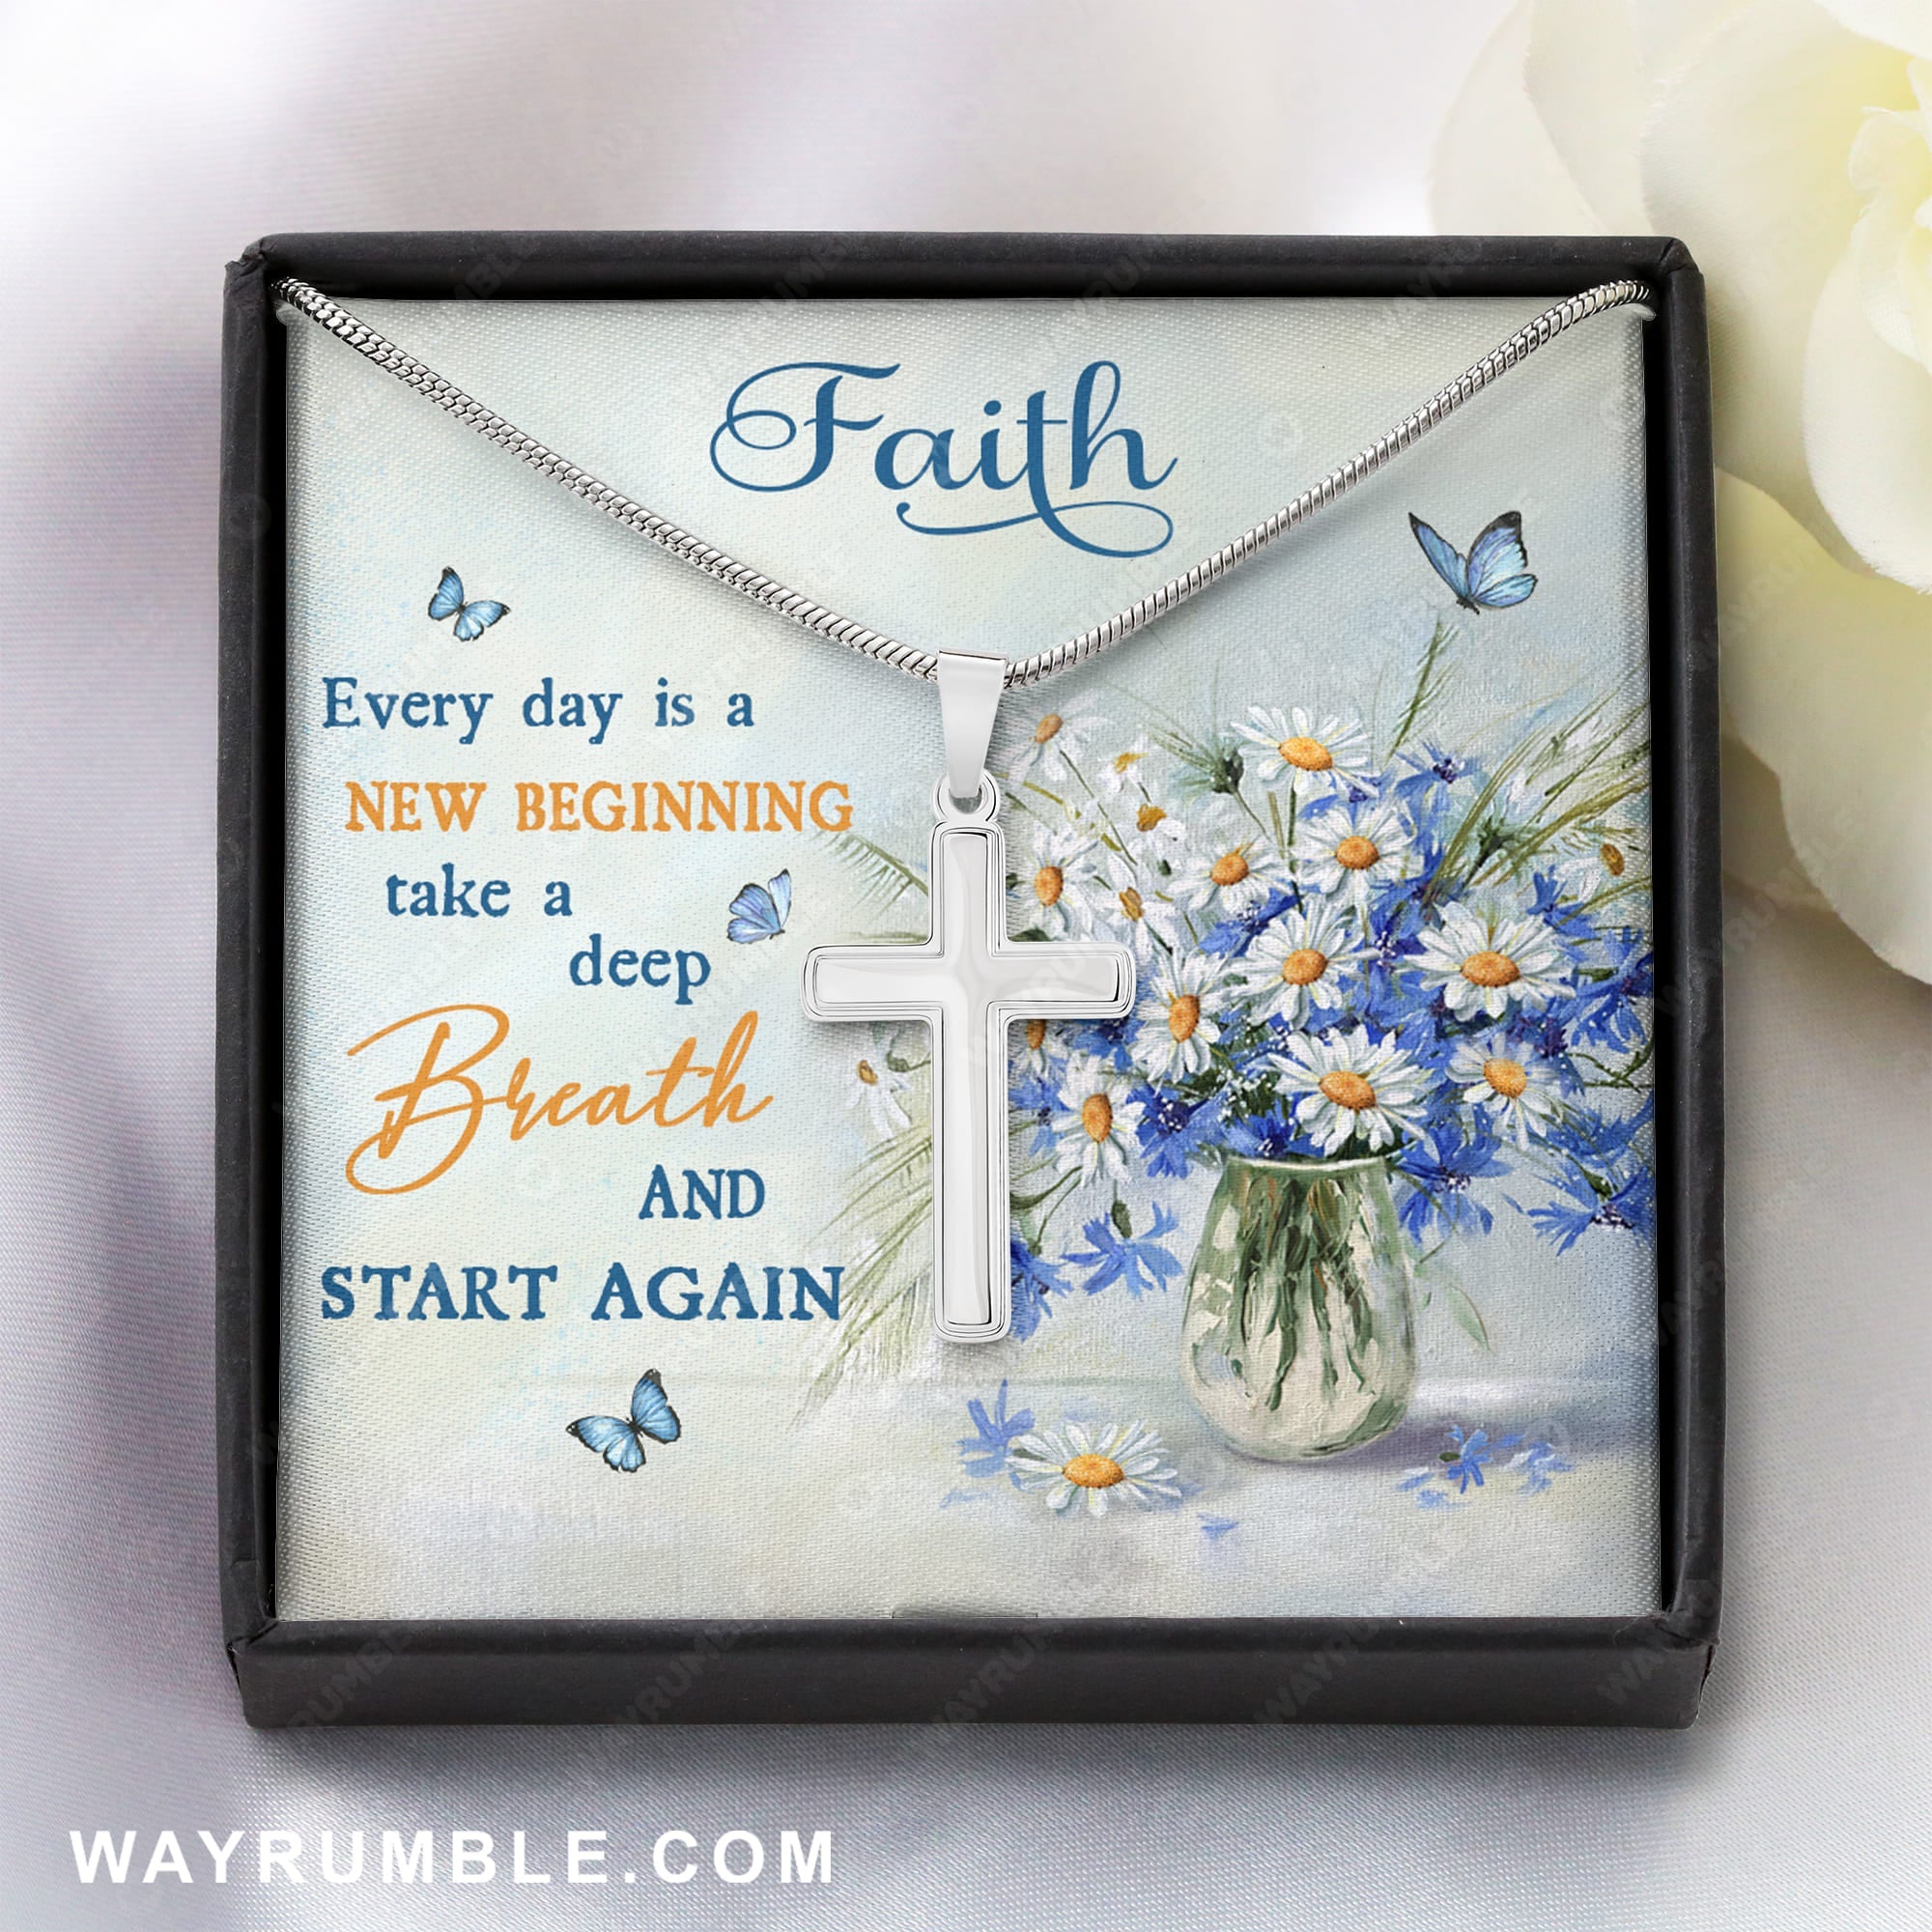 Daisy flower, Blue butterfly, Every day is a new beginning - Jesus Cross Necklace with Message Card